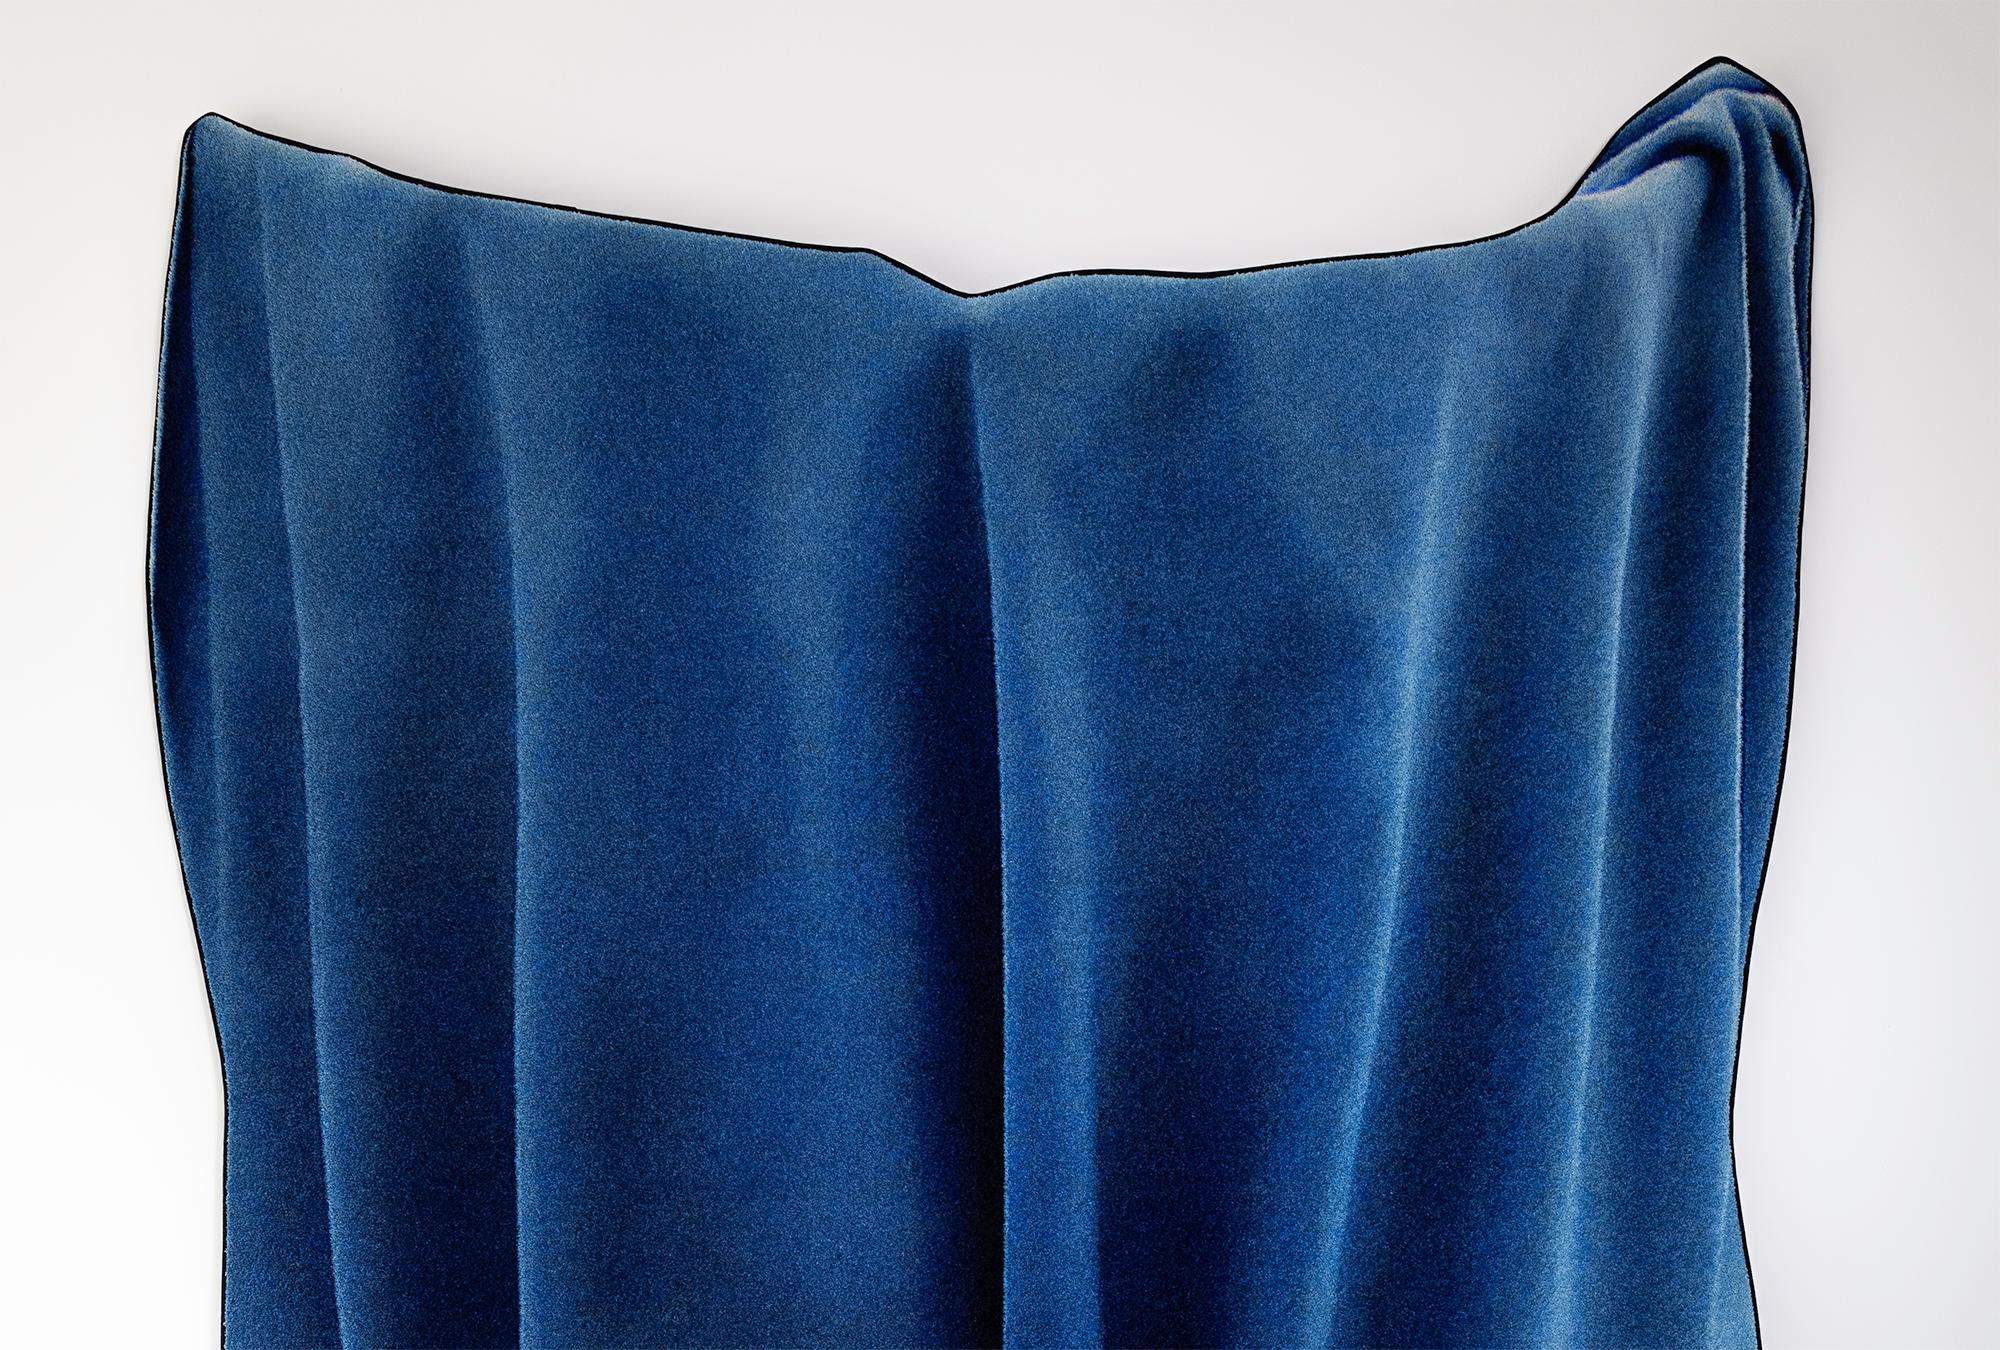 Dutch 'Royal Blue', Eye-Catching Modern Tufted Tapestry, Art Wallhanging and Rug